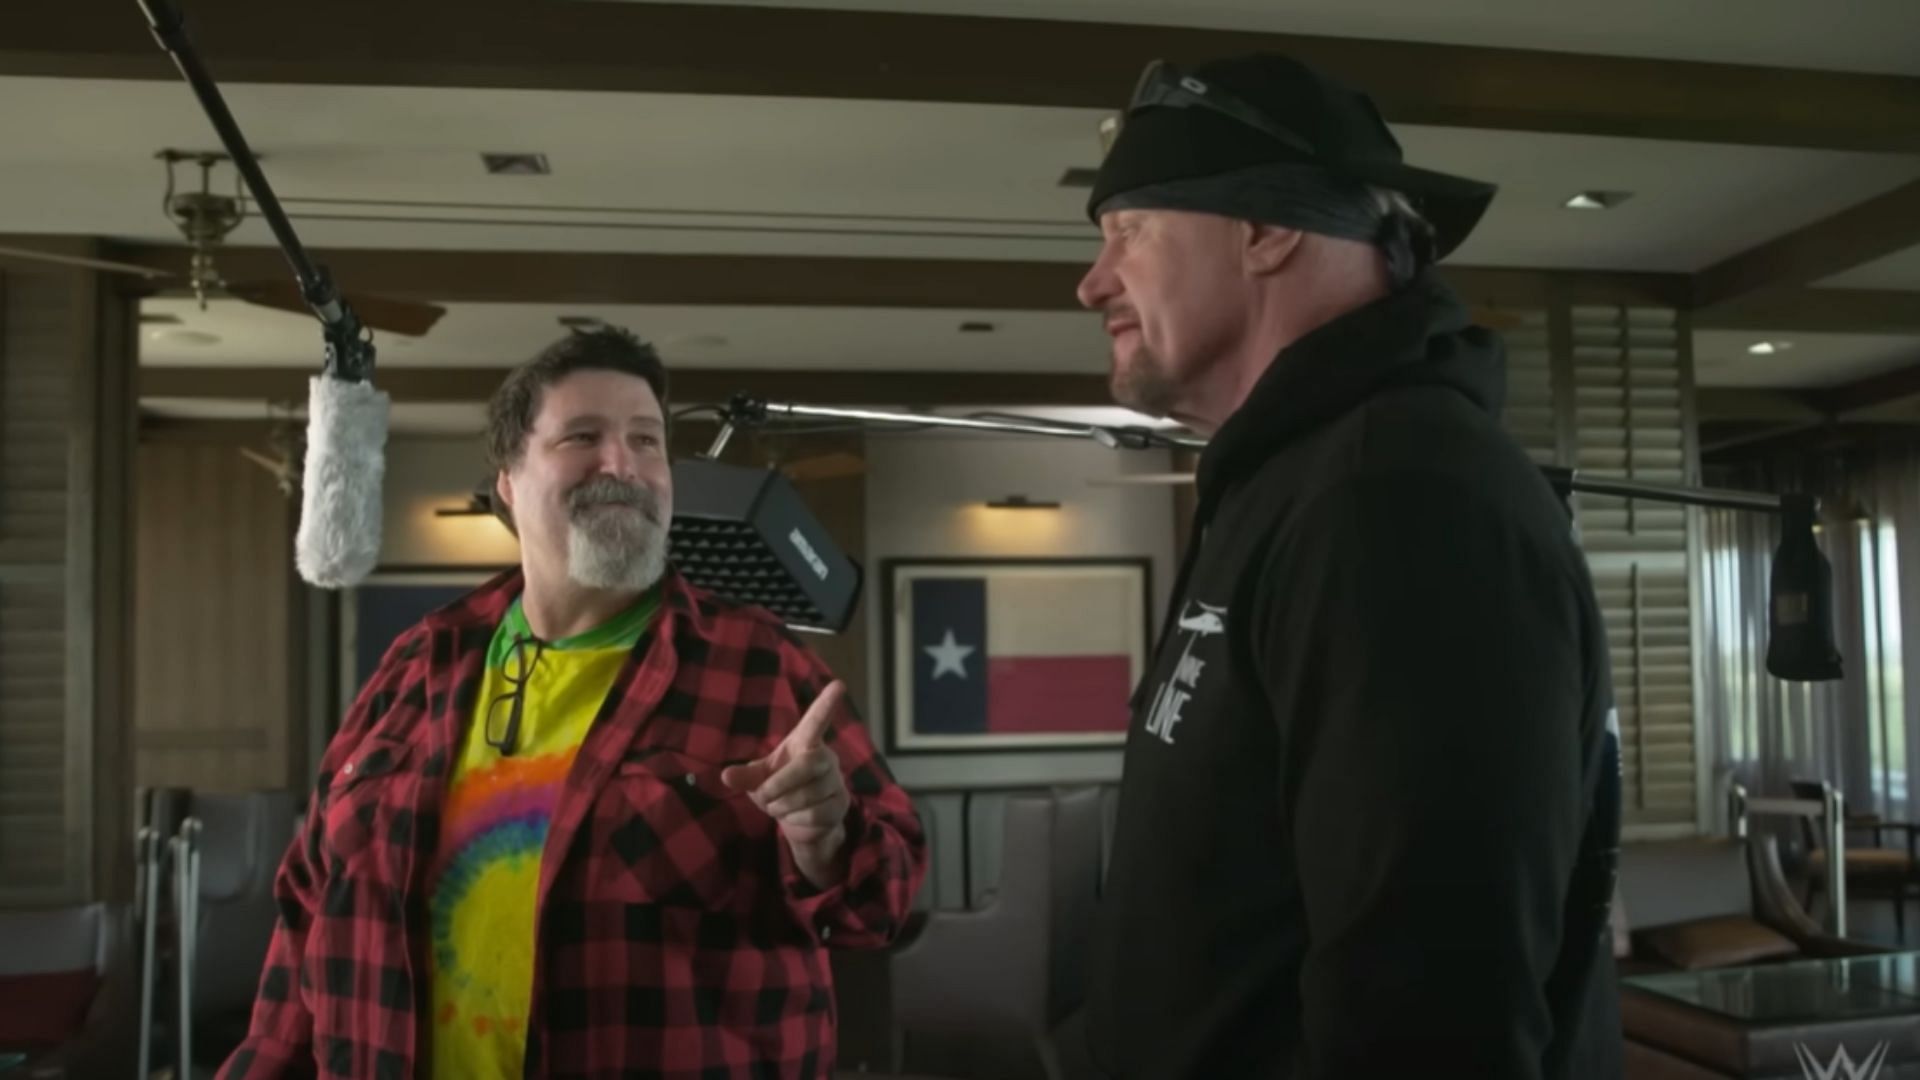 Mick Foley (left) and The Undertaker (right)